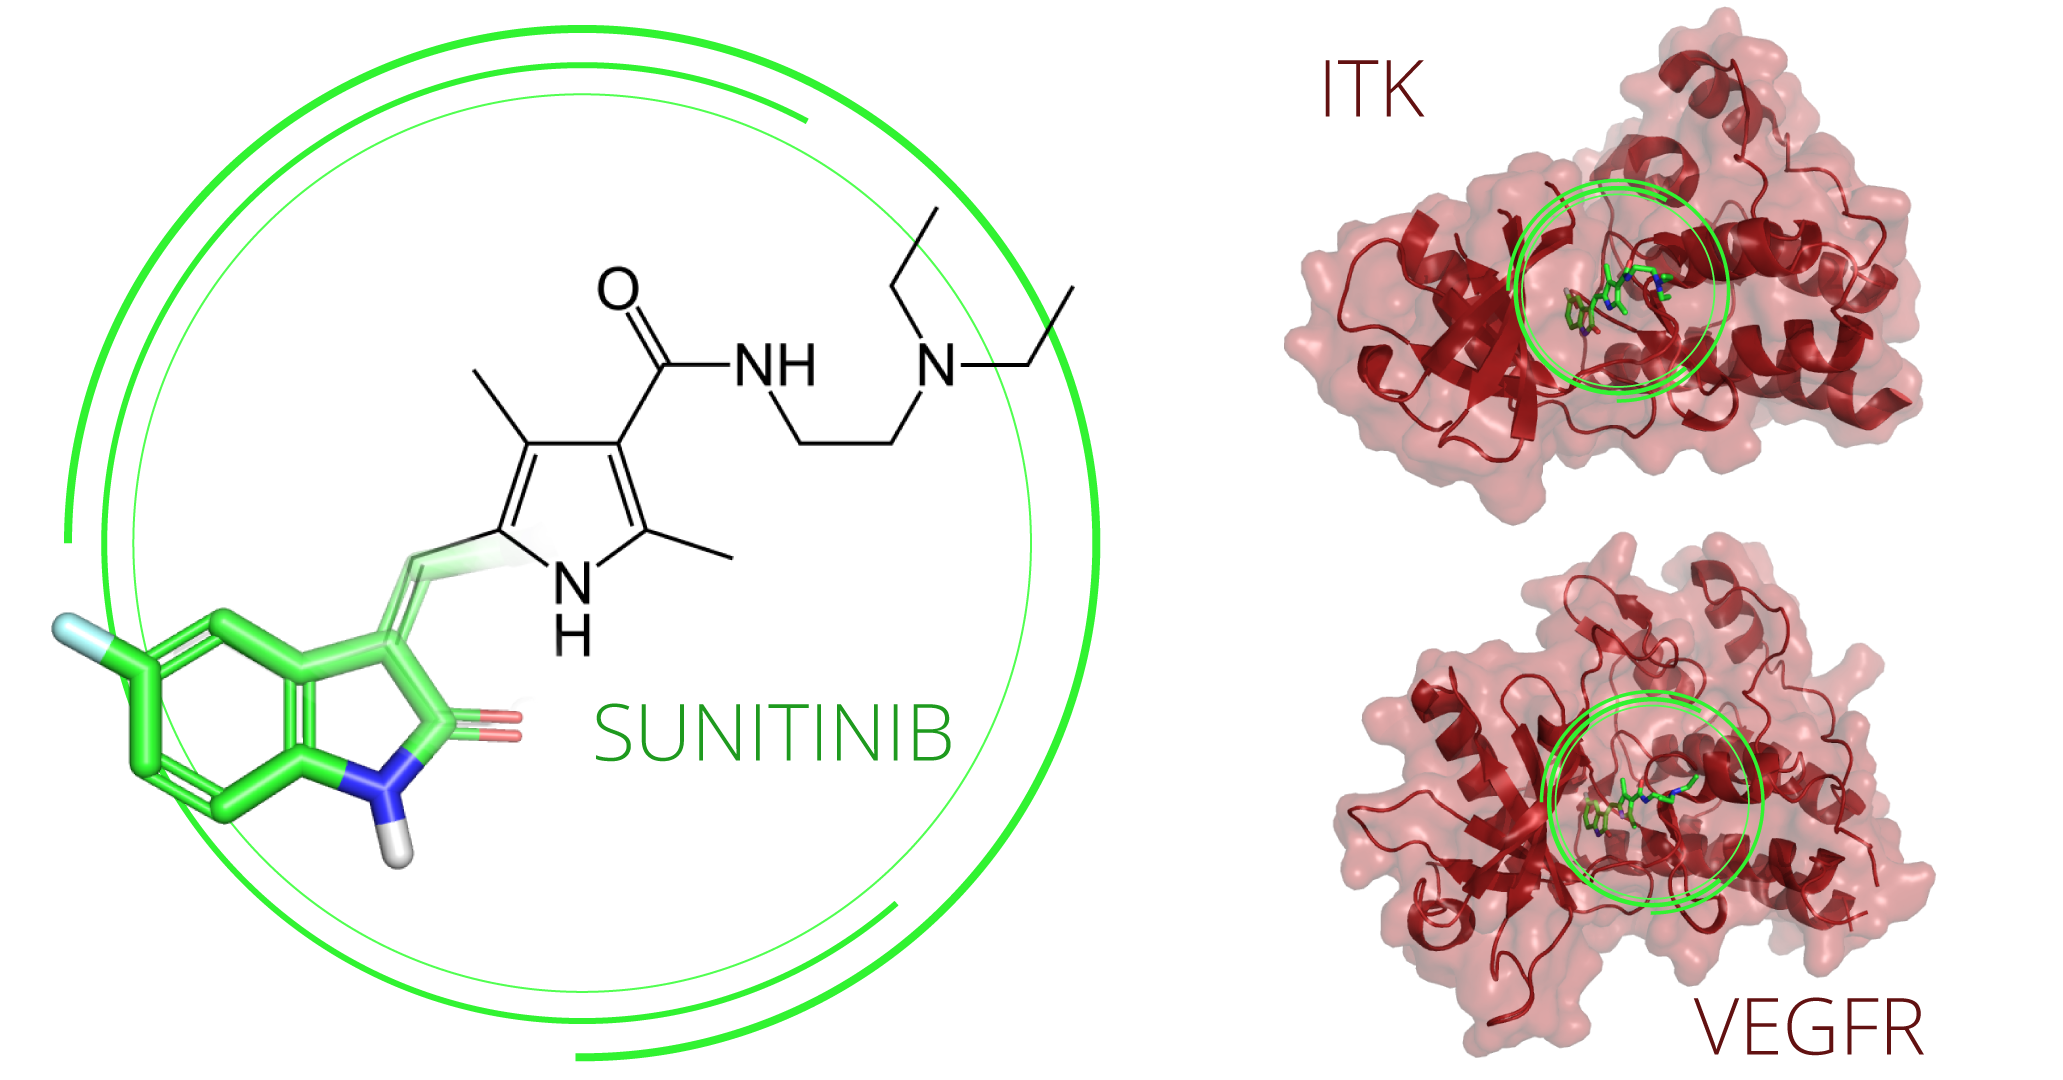 Figure 2.&nbsp;&nbsp;The 2D/3D fused chemical representation of sunitinib. Receptor tyrosine-kinase ITK and VEGFR (red) with sunitinib (red) inhibiting the active site of each.